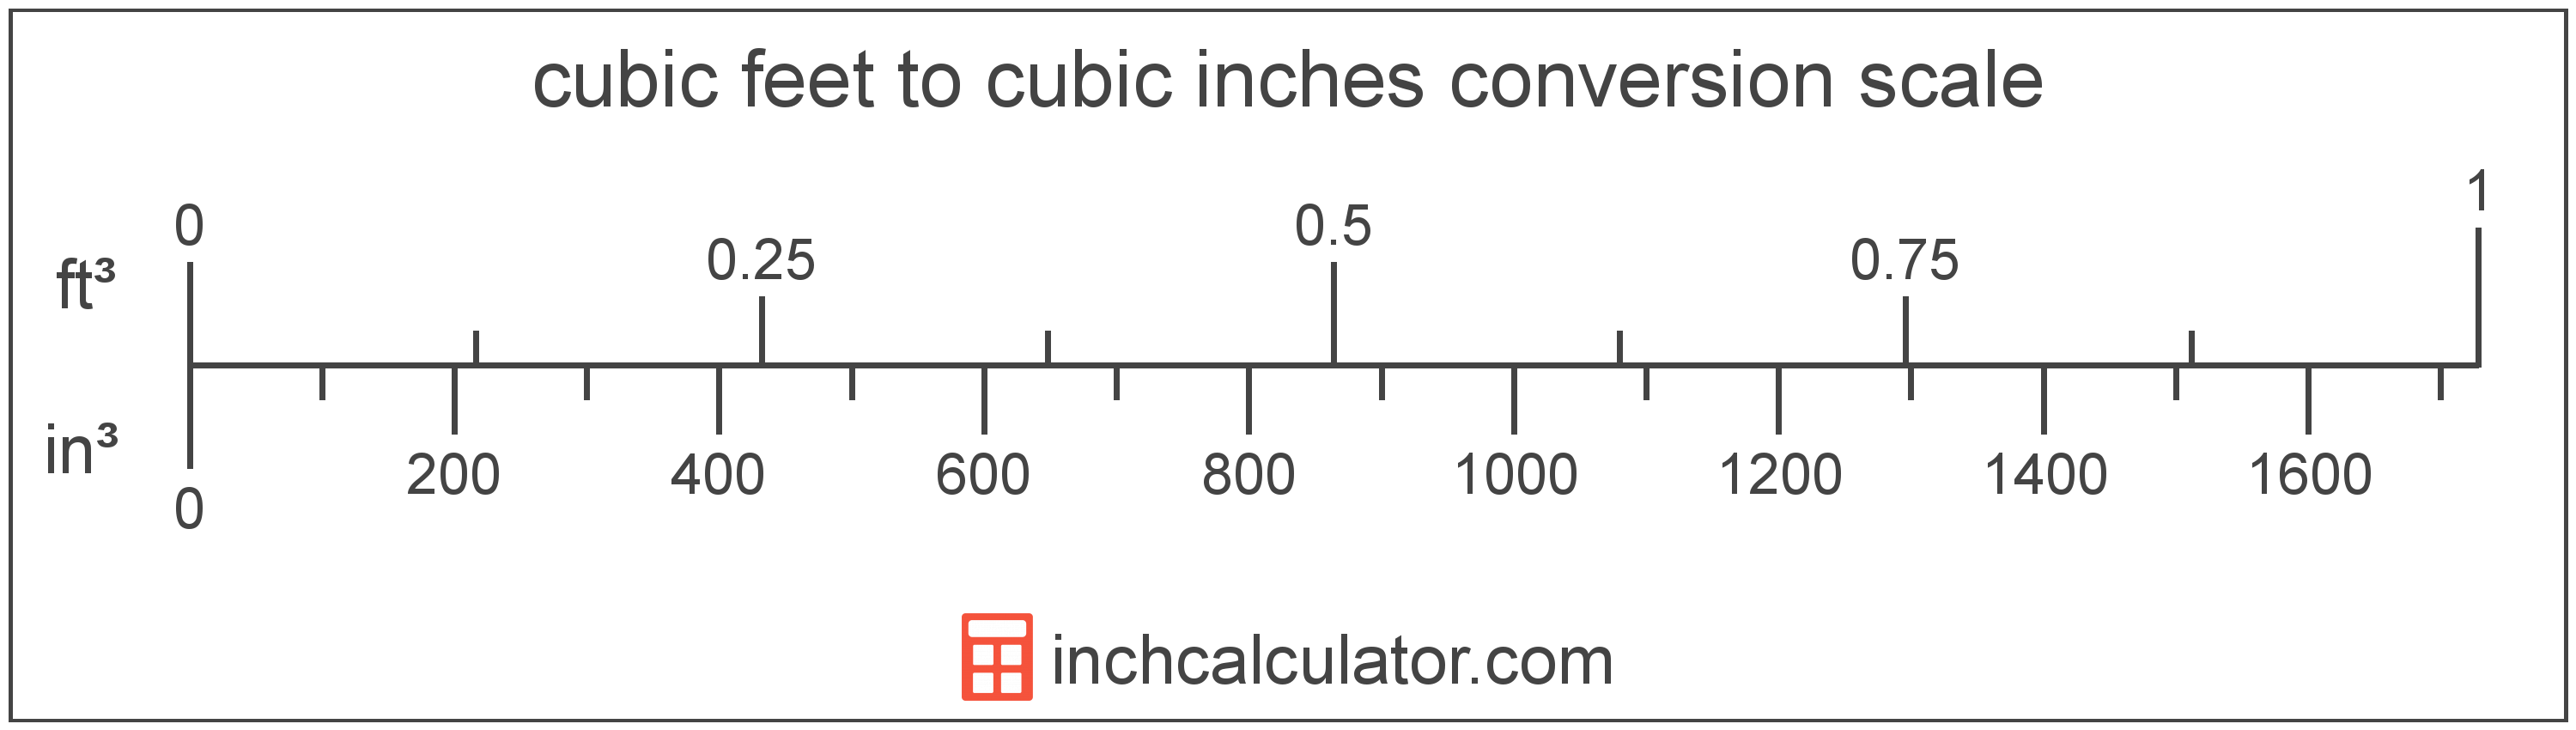 conversion scale showing cubic feet and equivalent cubic inches volume values